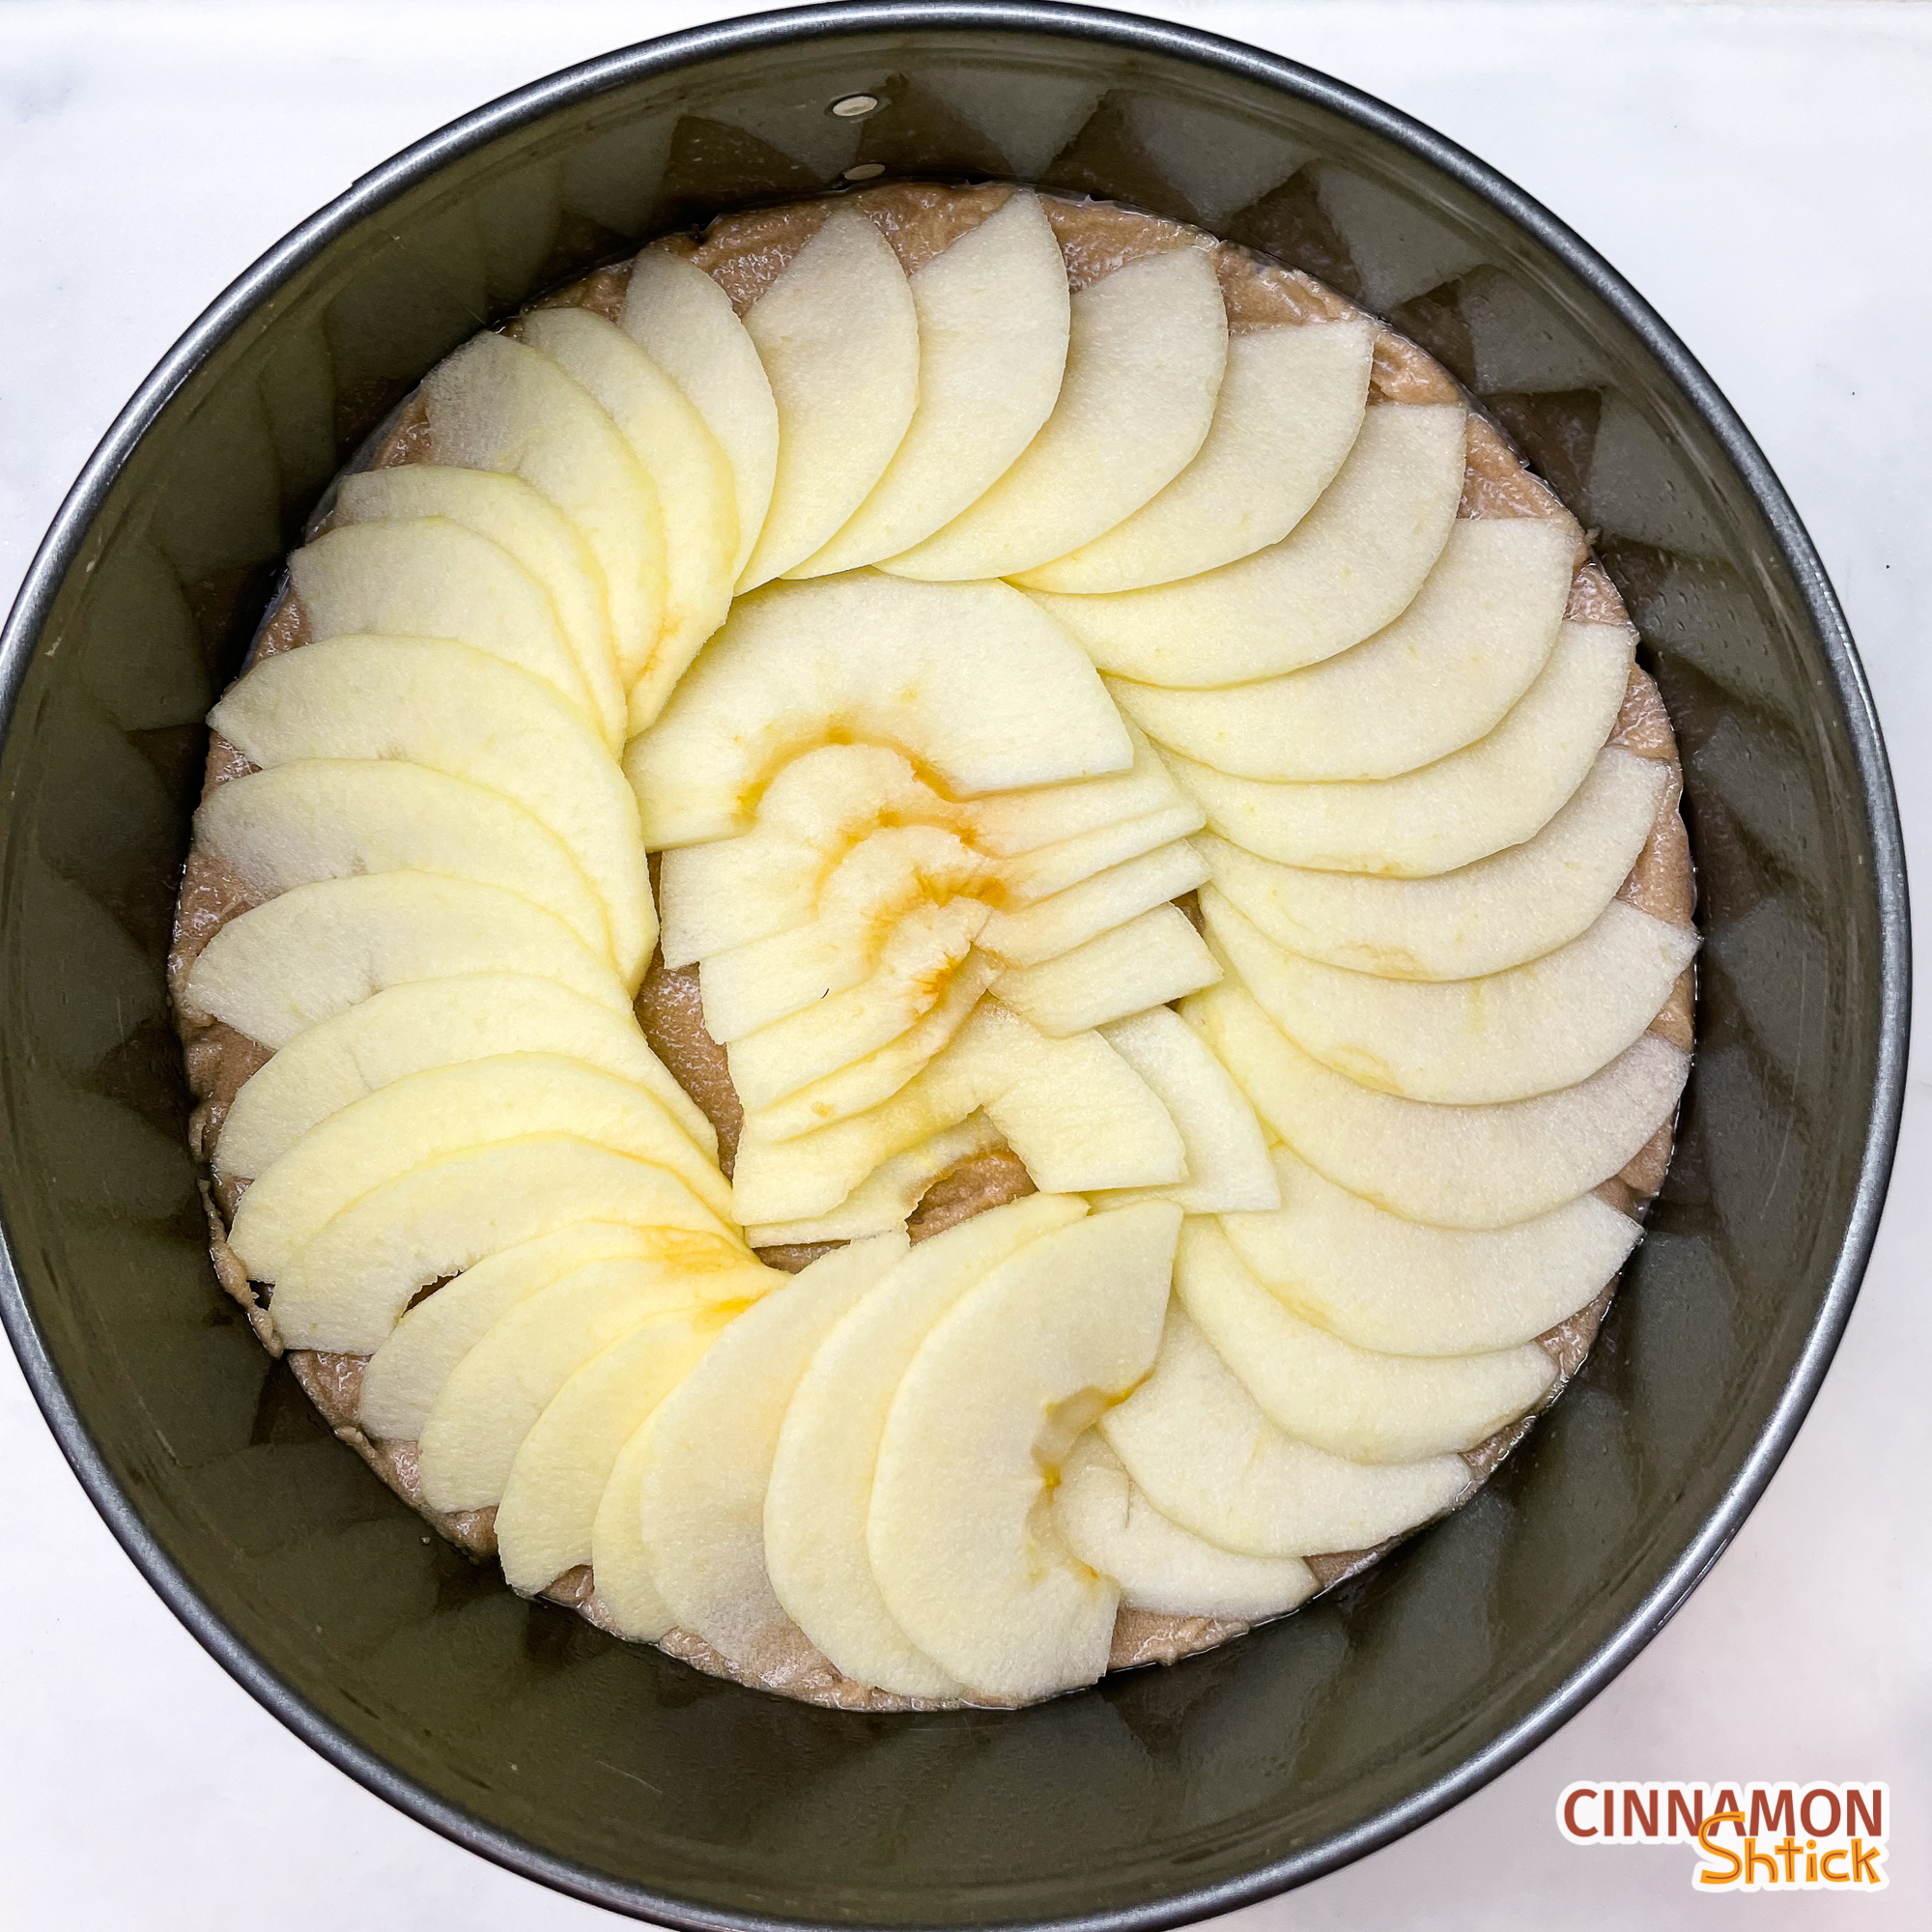 apples arranged decoratively in the springform pan